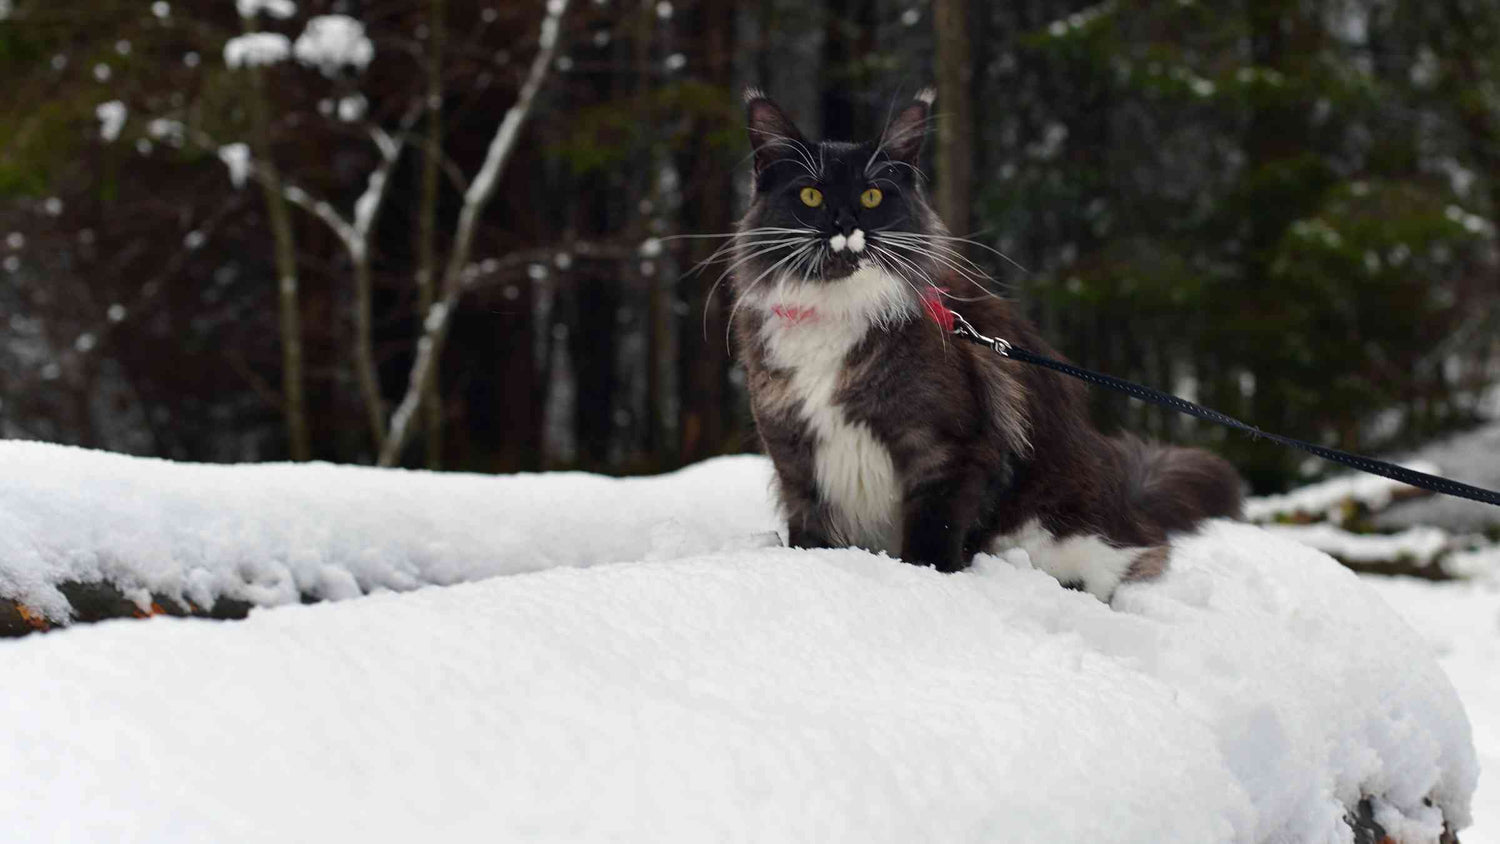 8 Cat Breeds That Love Winter - Black & white Maine Coon cat outside in the snow